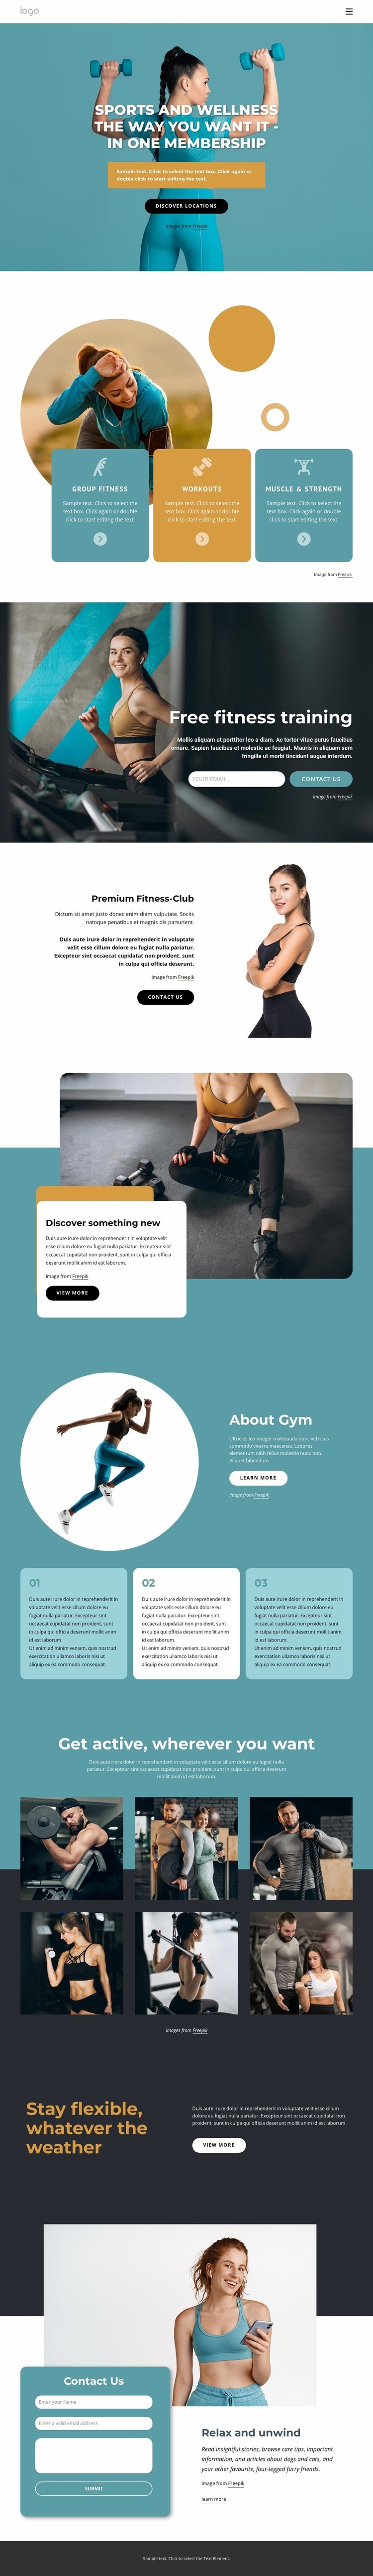 Workout anywhere with one membership Squarespace Template Alternative